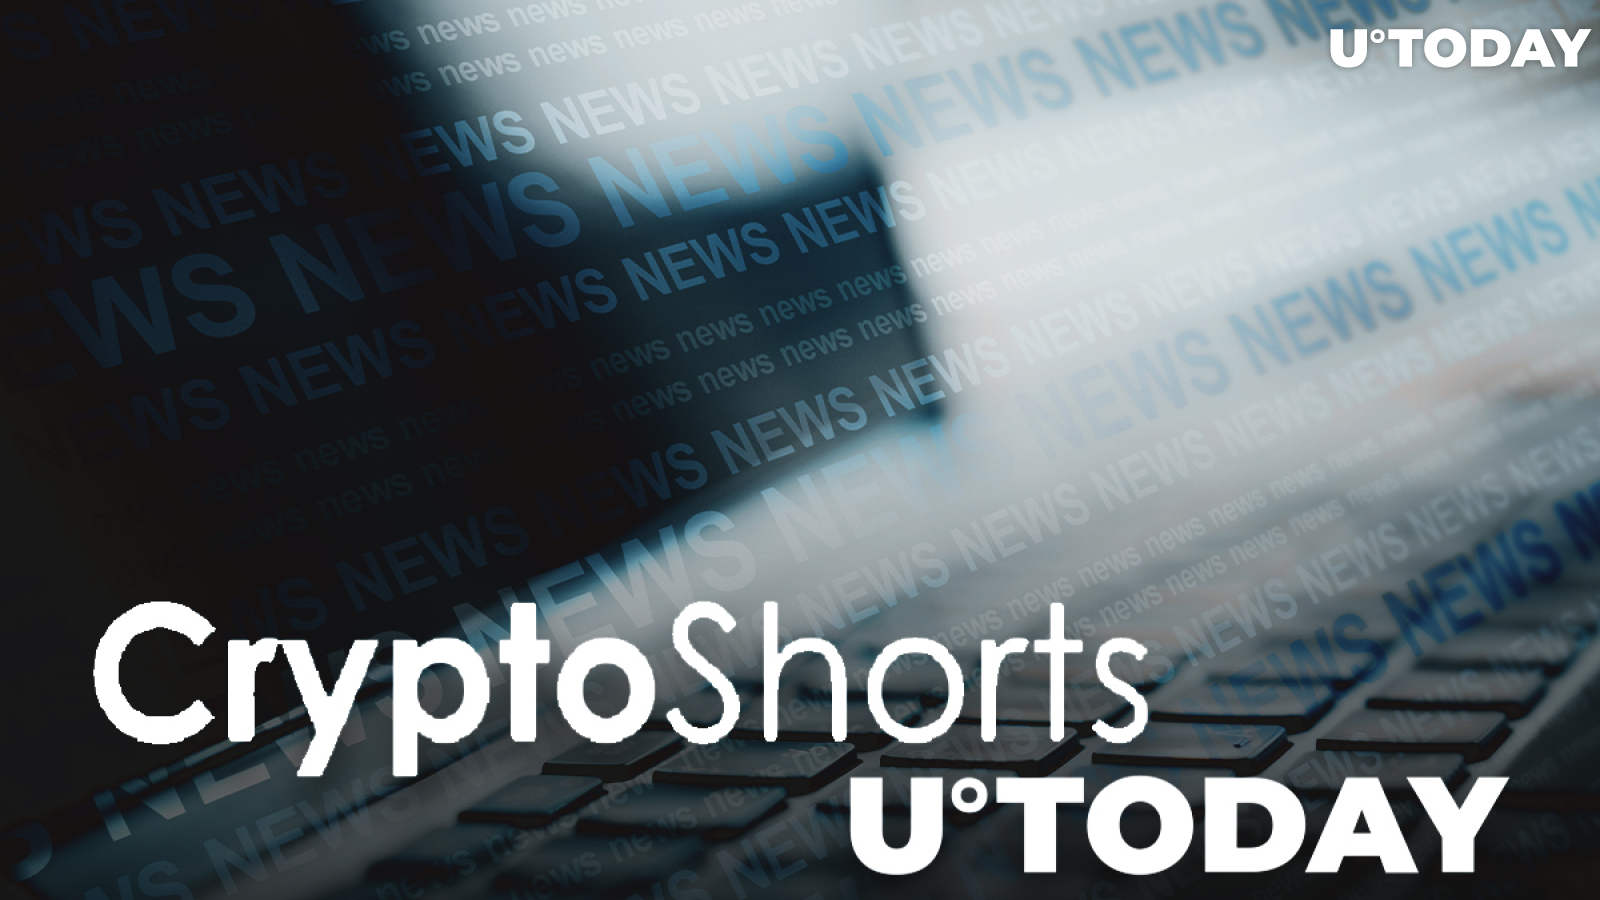 U.Today Articles Are Now on CryptoShorts